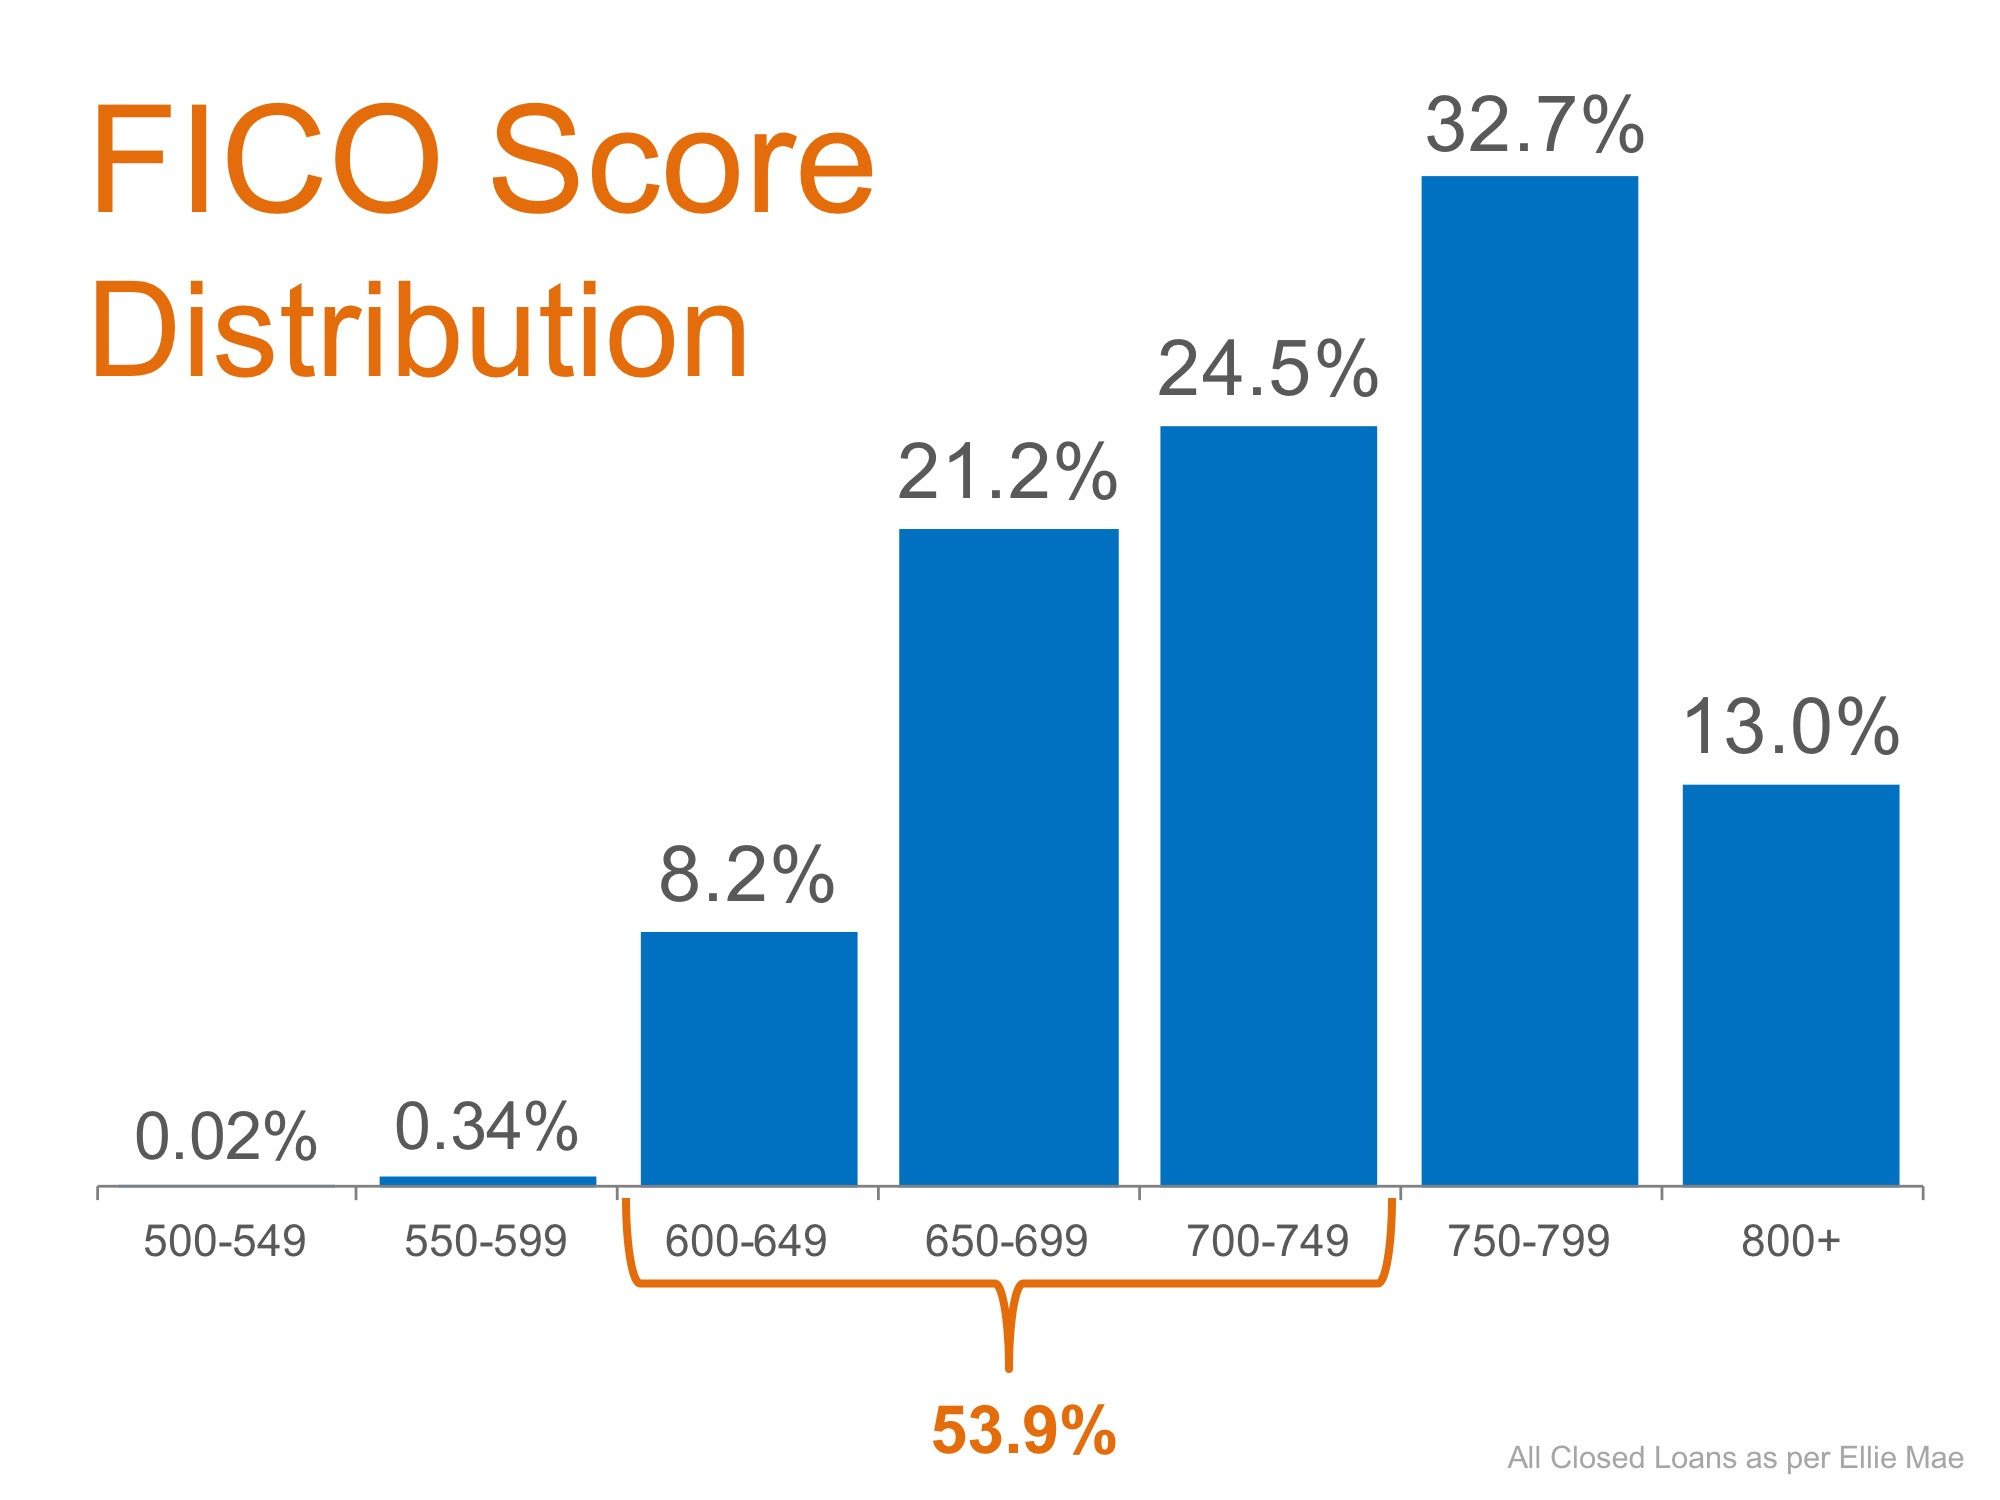 Don't Disqualify Yourself... Over Half of All Loans Approved Have a FICO Score Under 750 | MyKCM